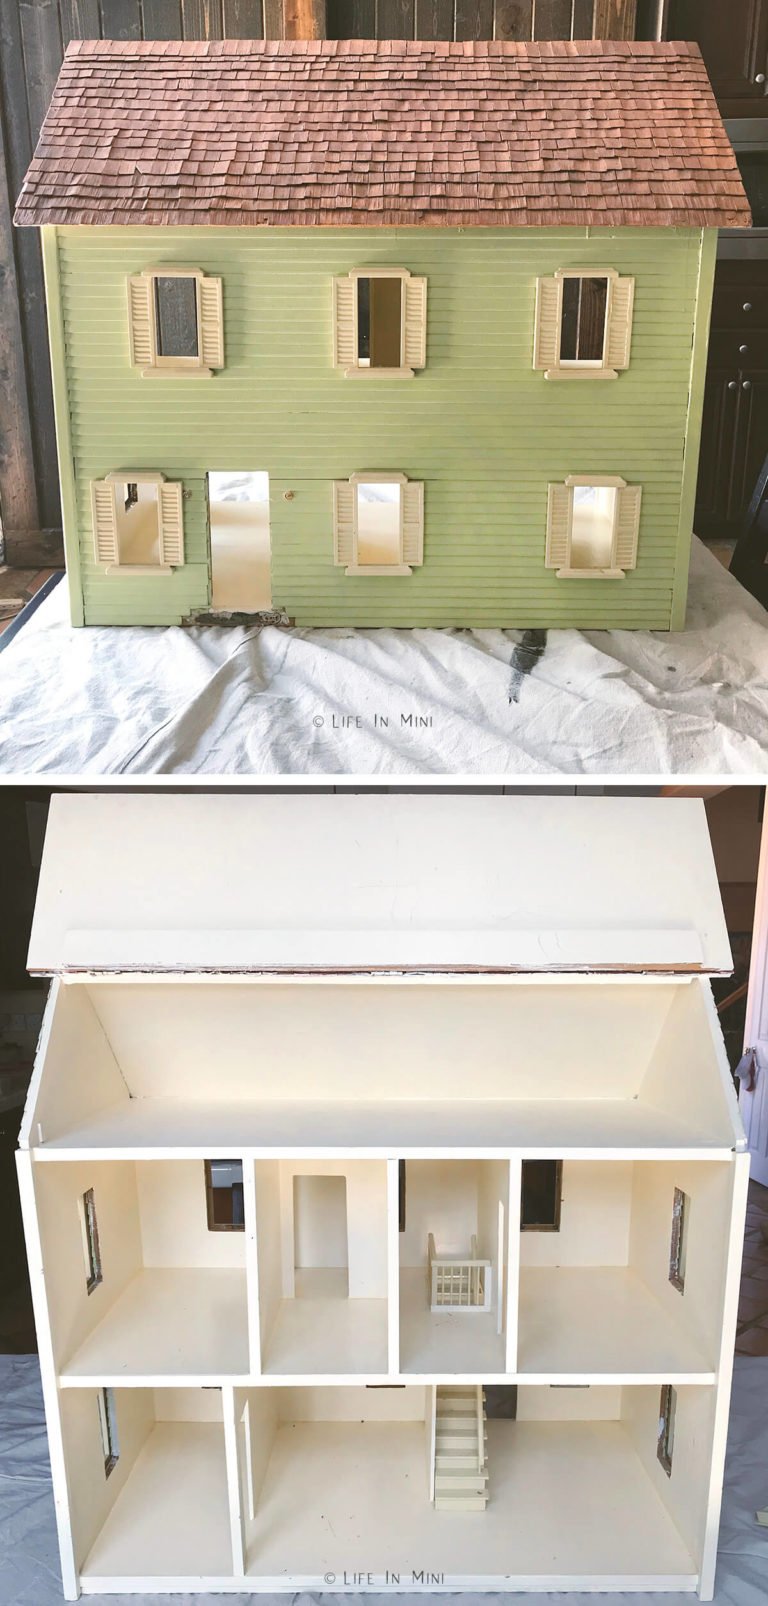 Before shots of old dollhouse, exterior painted cream and light green, interior cream